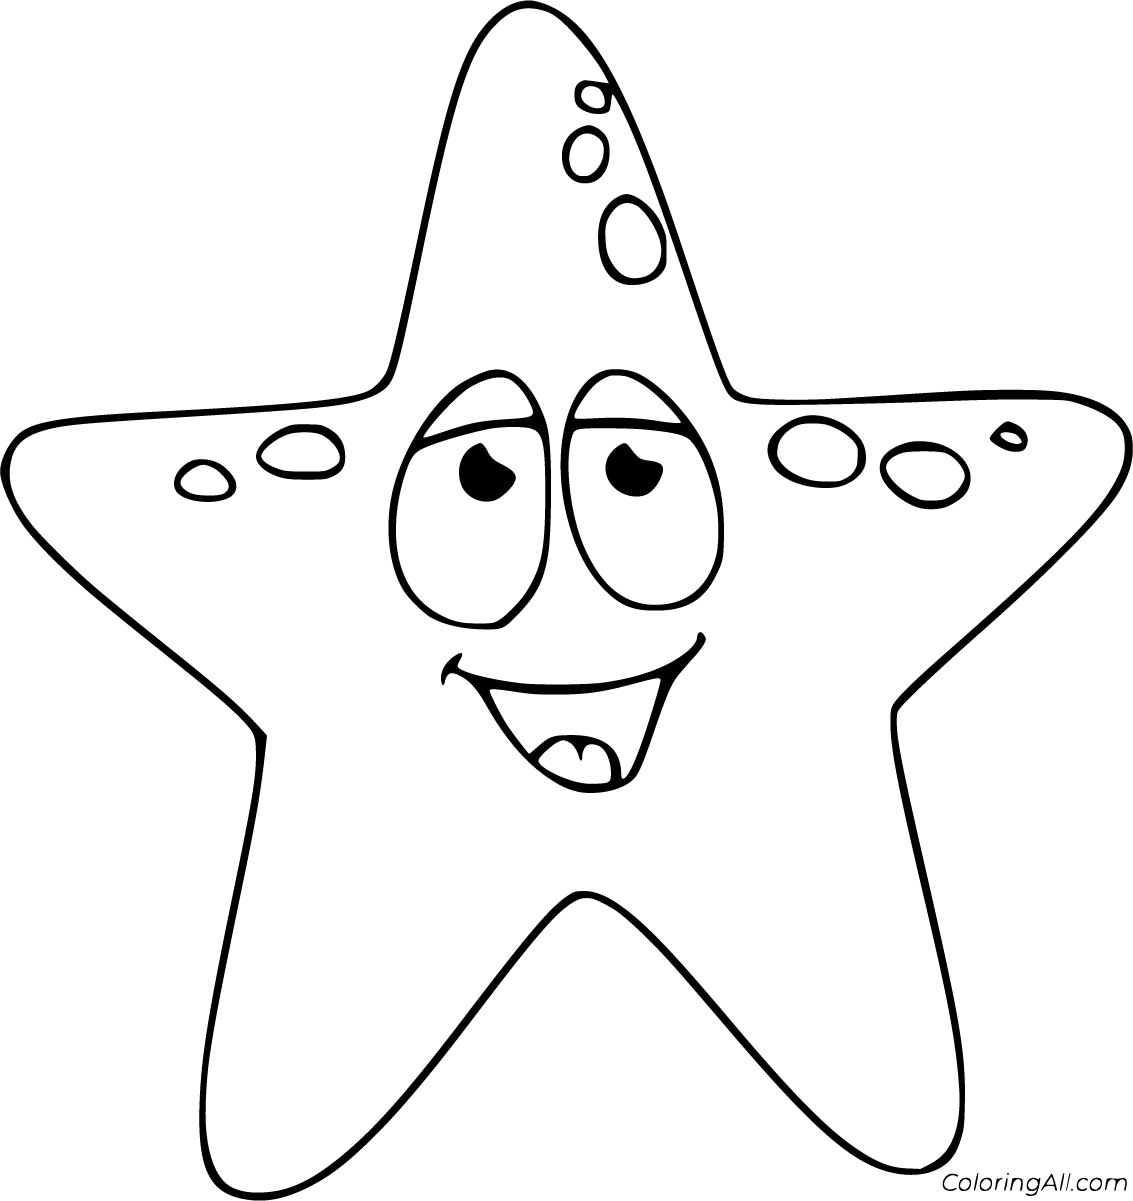 Download Starfish Coloring Pages - ColoringAll